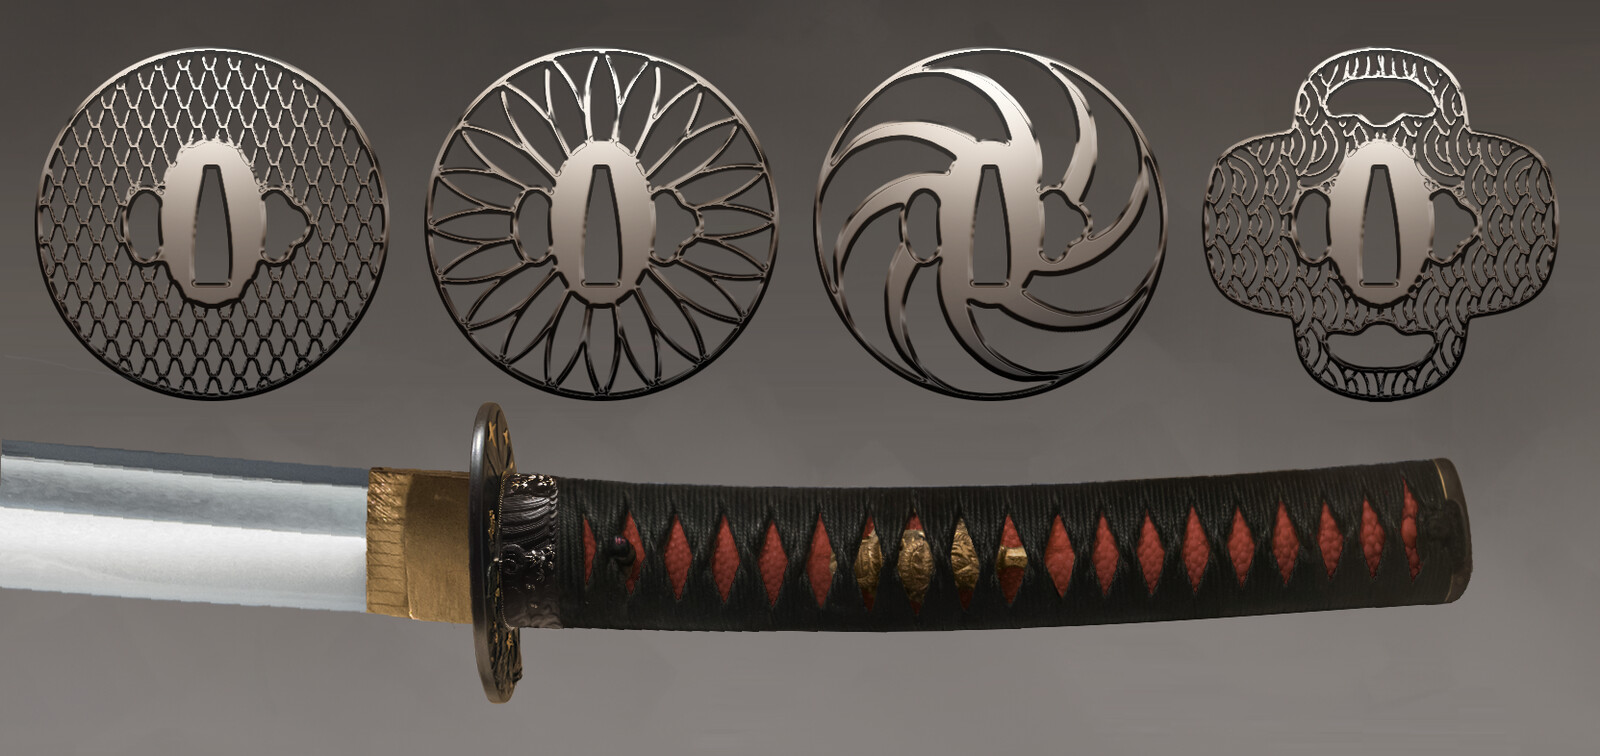 Different ideas for the katana guards.